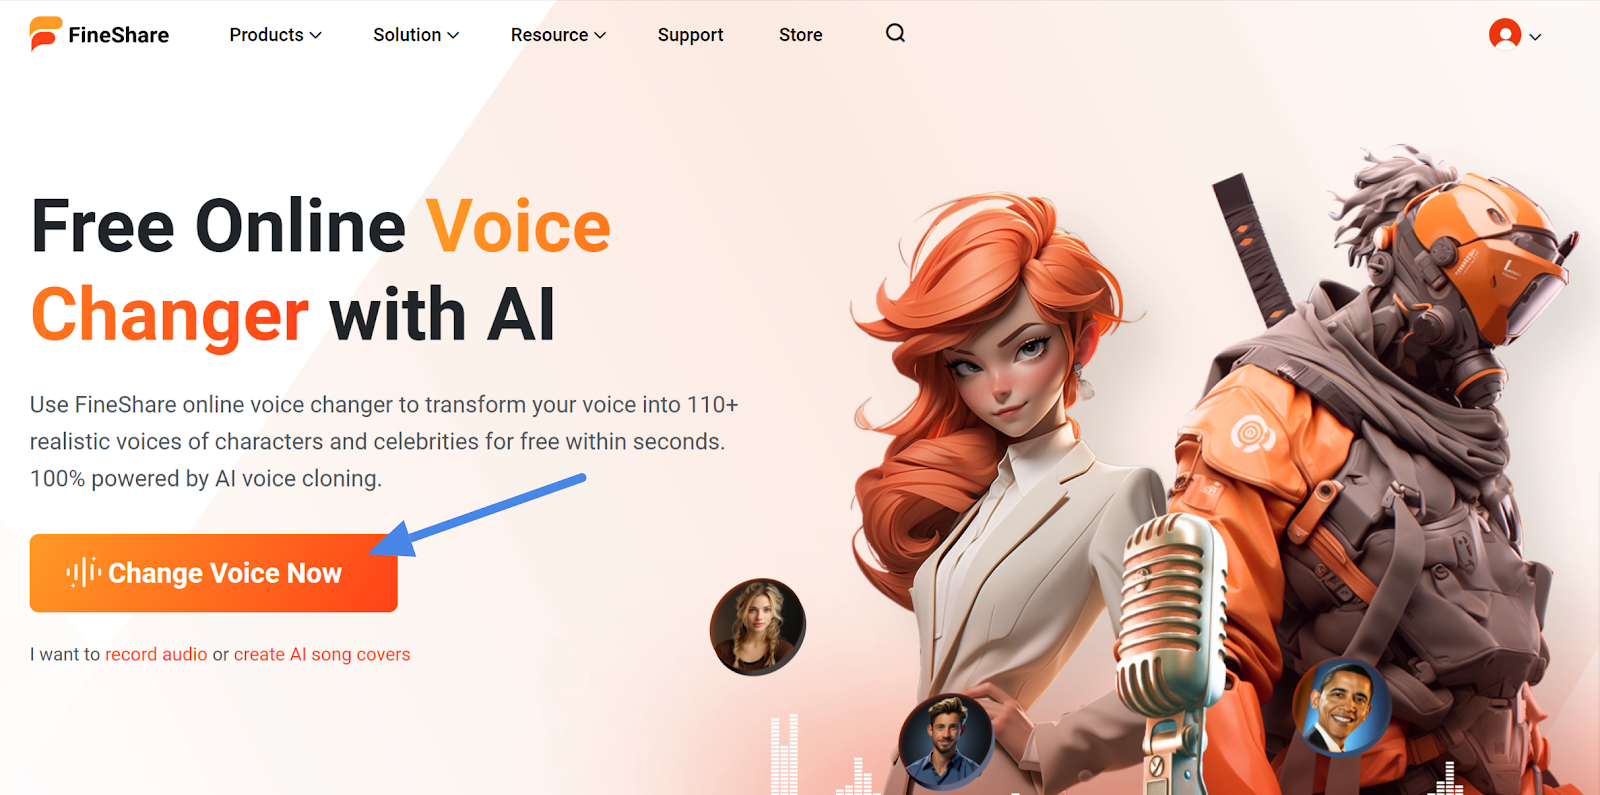 The FineShare free online voice changer with AI landing page.